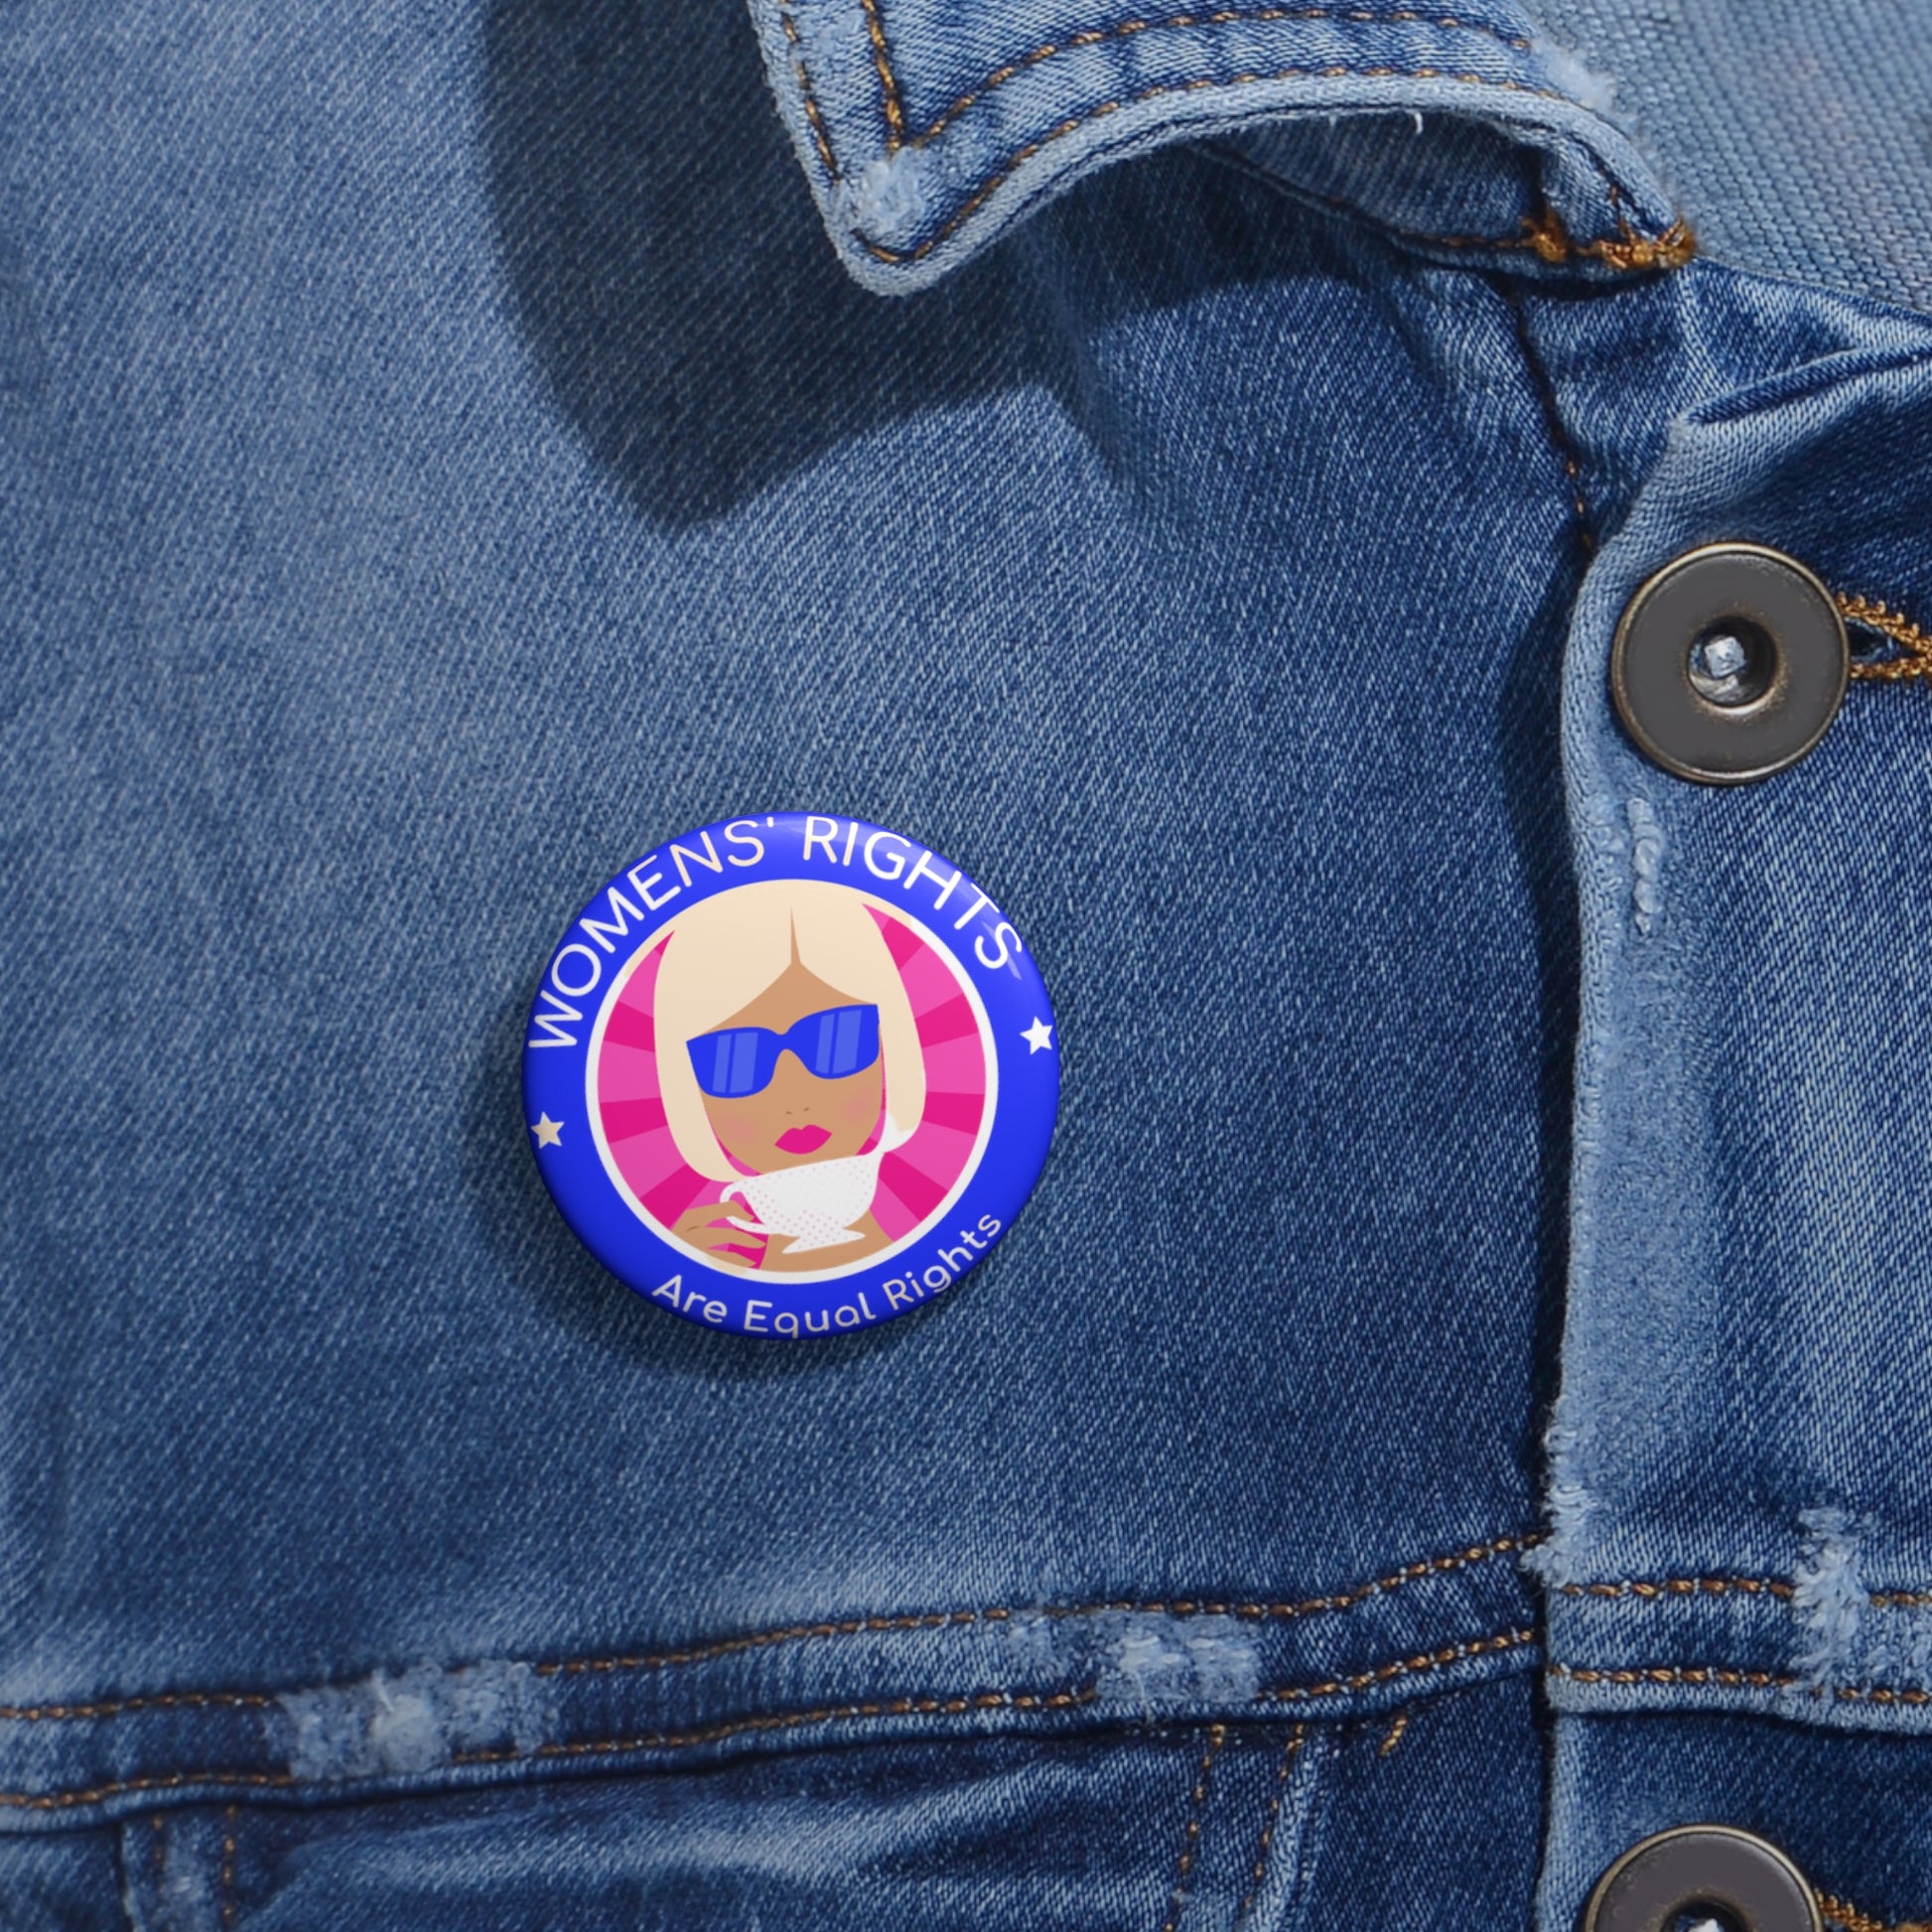 Mock up of the 1.25" button on a denim shirt